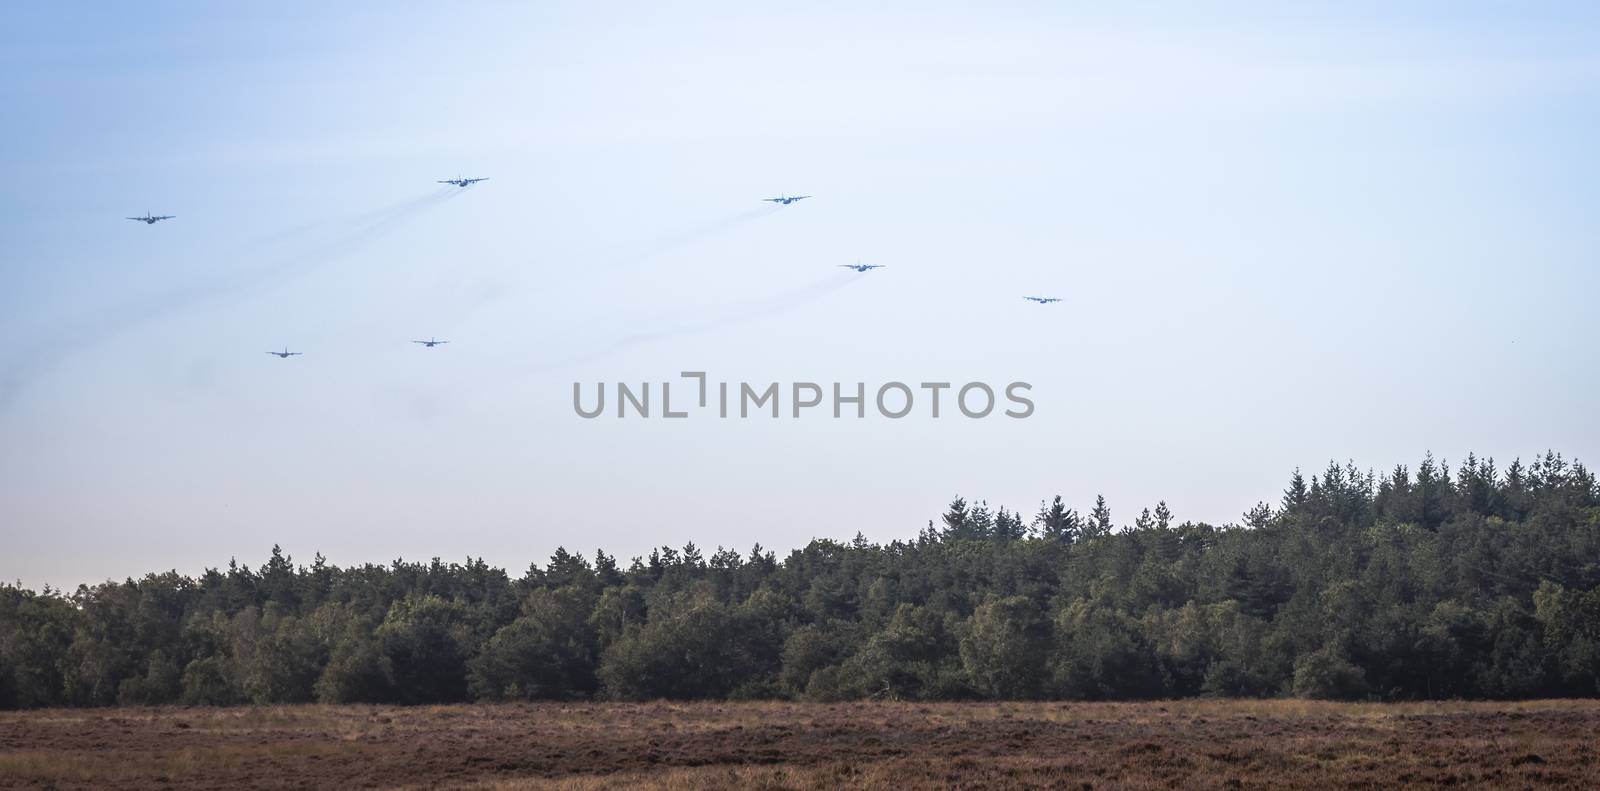 planes approaching ede for para droppings by compuinfoto